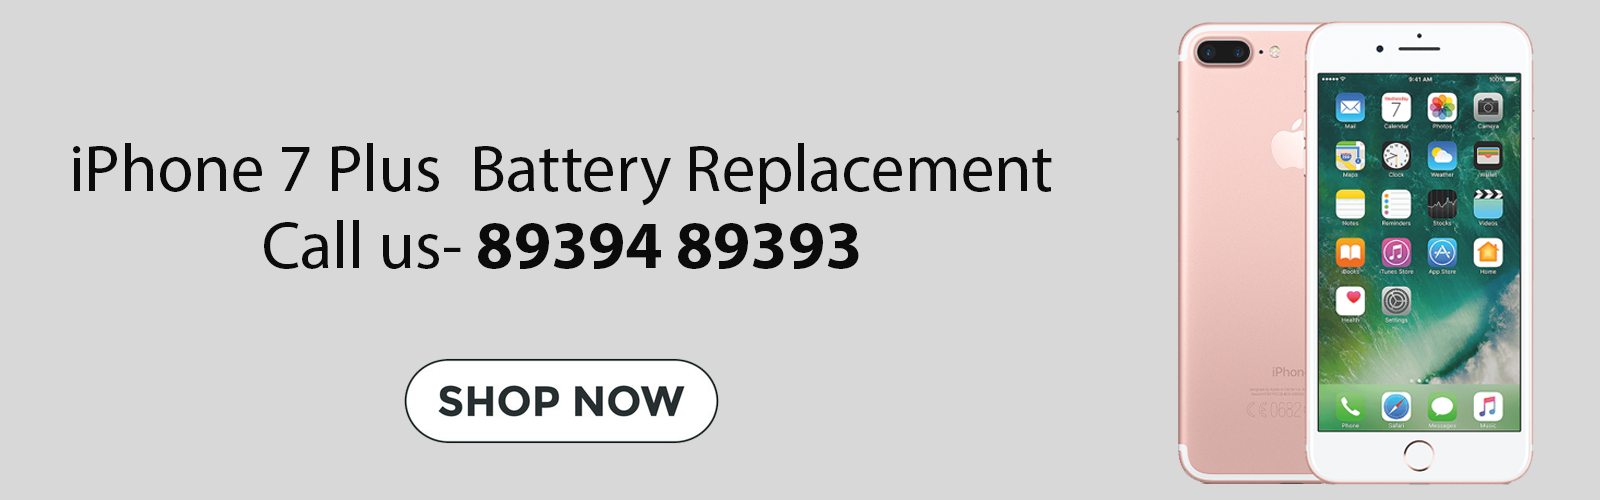 iPhone 7 Plus Battery Replacement Price Chennai